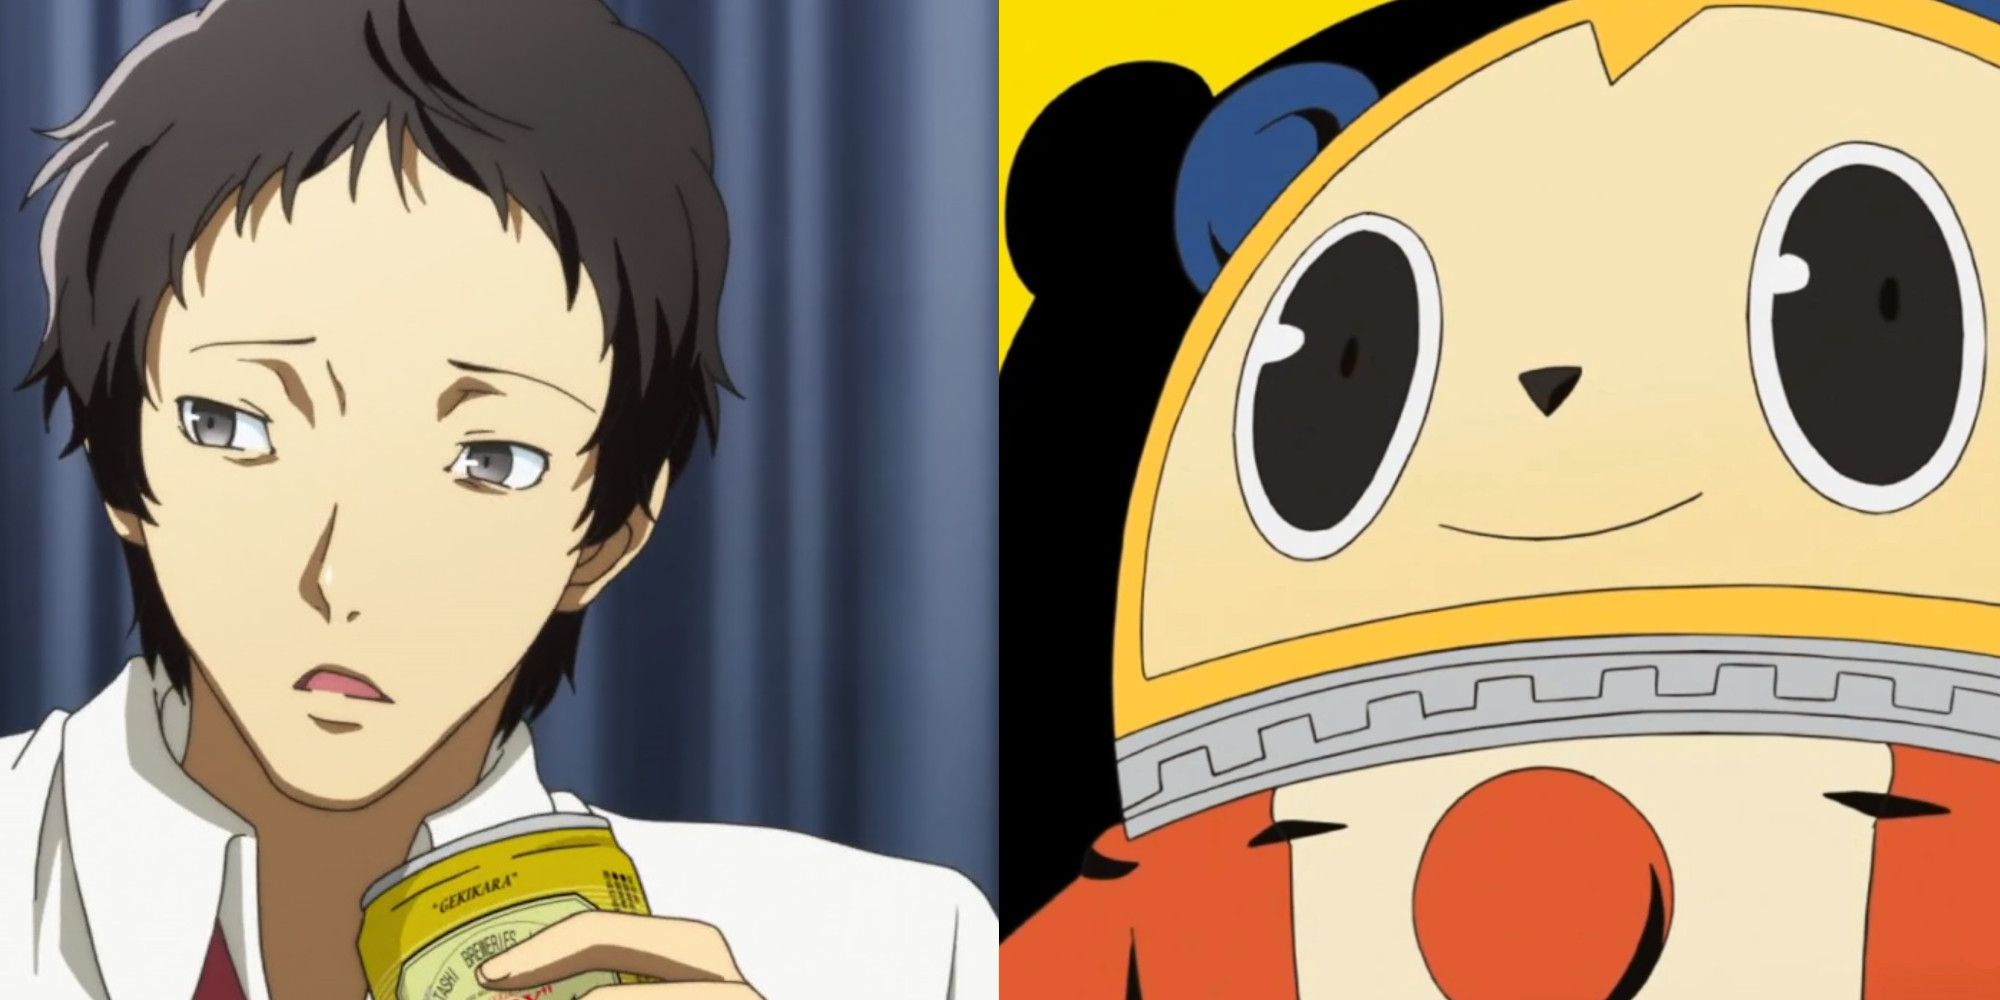 Teddie And Adachi From Persona 4